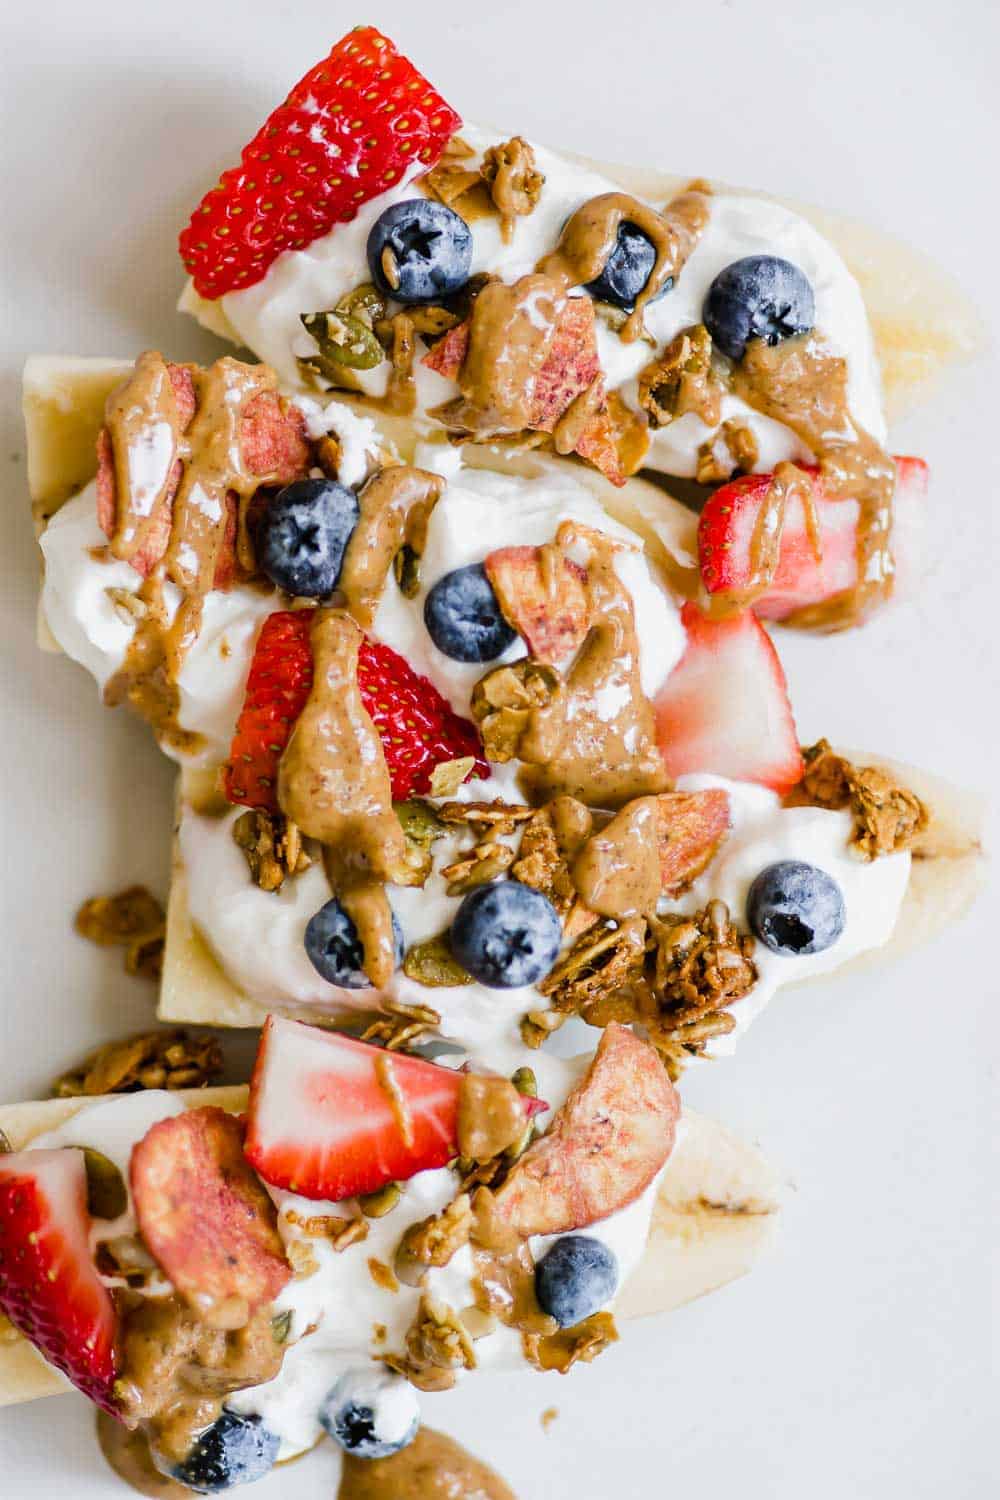 Make this Healthy Banana Split recipe as a better-for-you laternative to the traditiaonal dessert. Serve as an afternoon snack, or as a twist on breakfast. Made with only 5 ingredients, this dish can be made in just 5 minutes. It's a recipe the whole family will love! || The Butter Half #snackrecipes #breakfastrecipes #healthydesserts #bananasplitrecipe #thebutterhalf